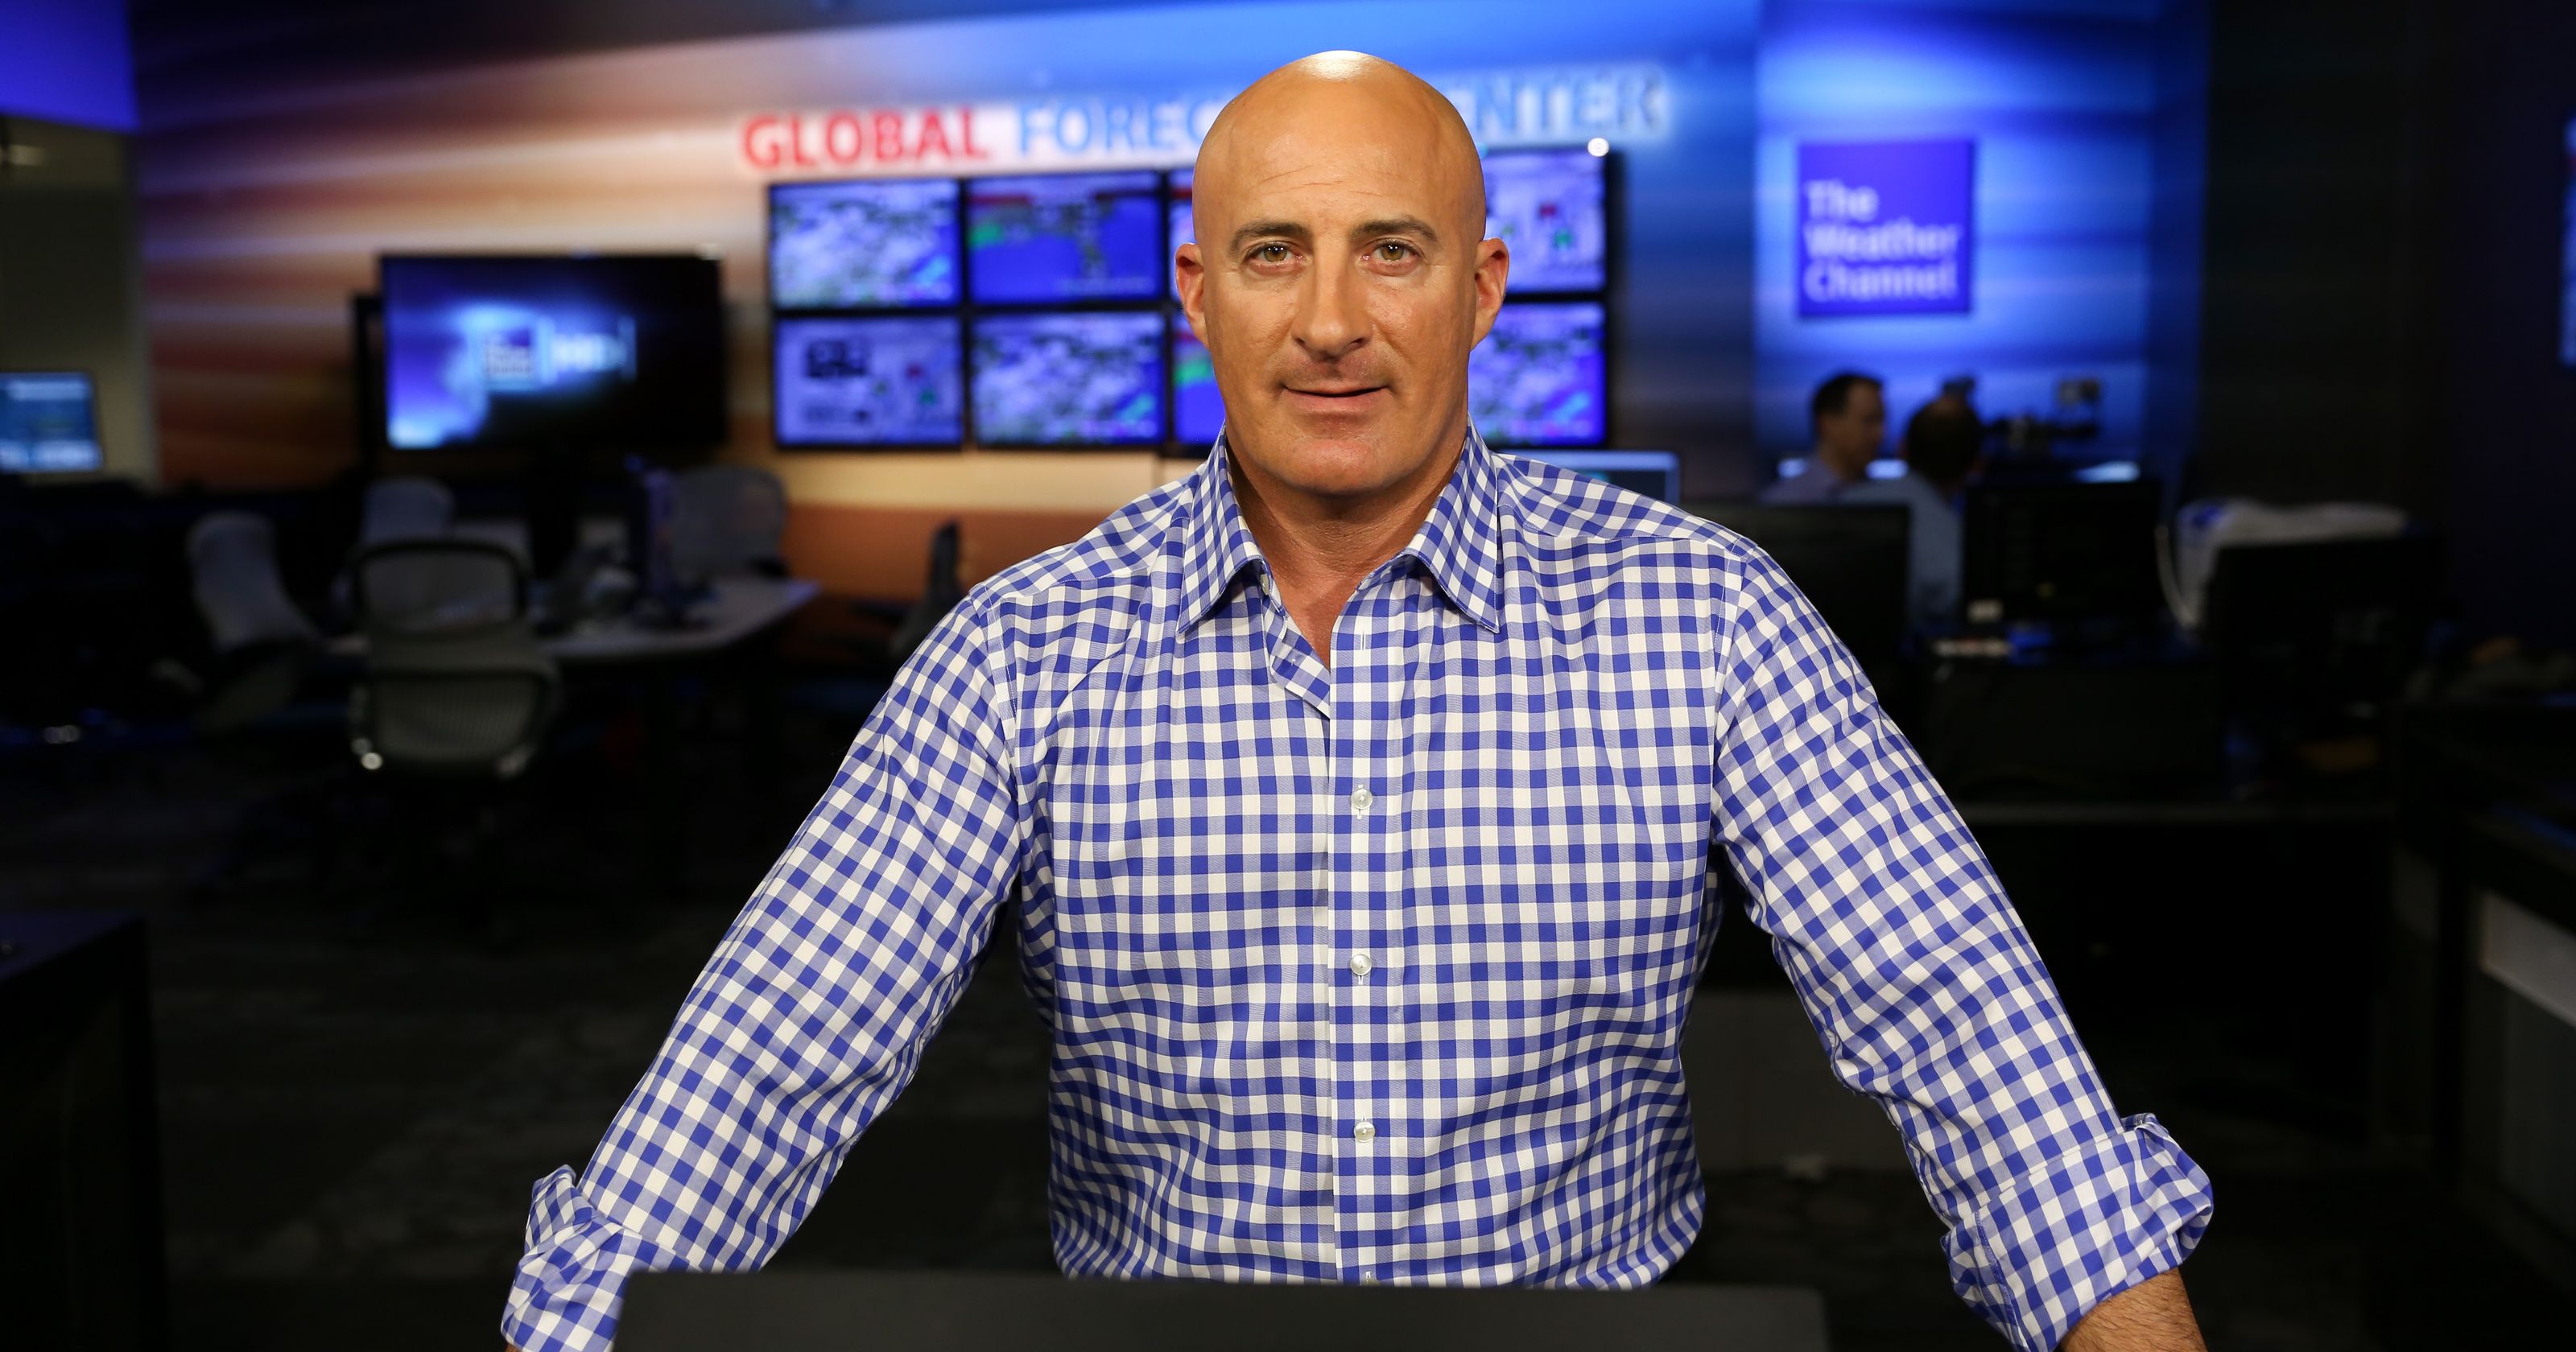 Where really is Jim Cantore now? Wiki: Husband, Net Worth